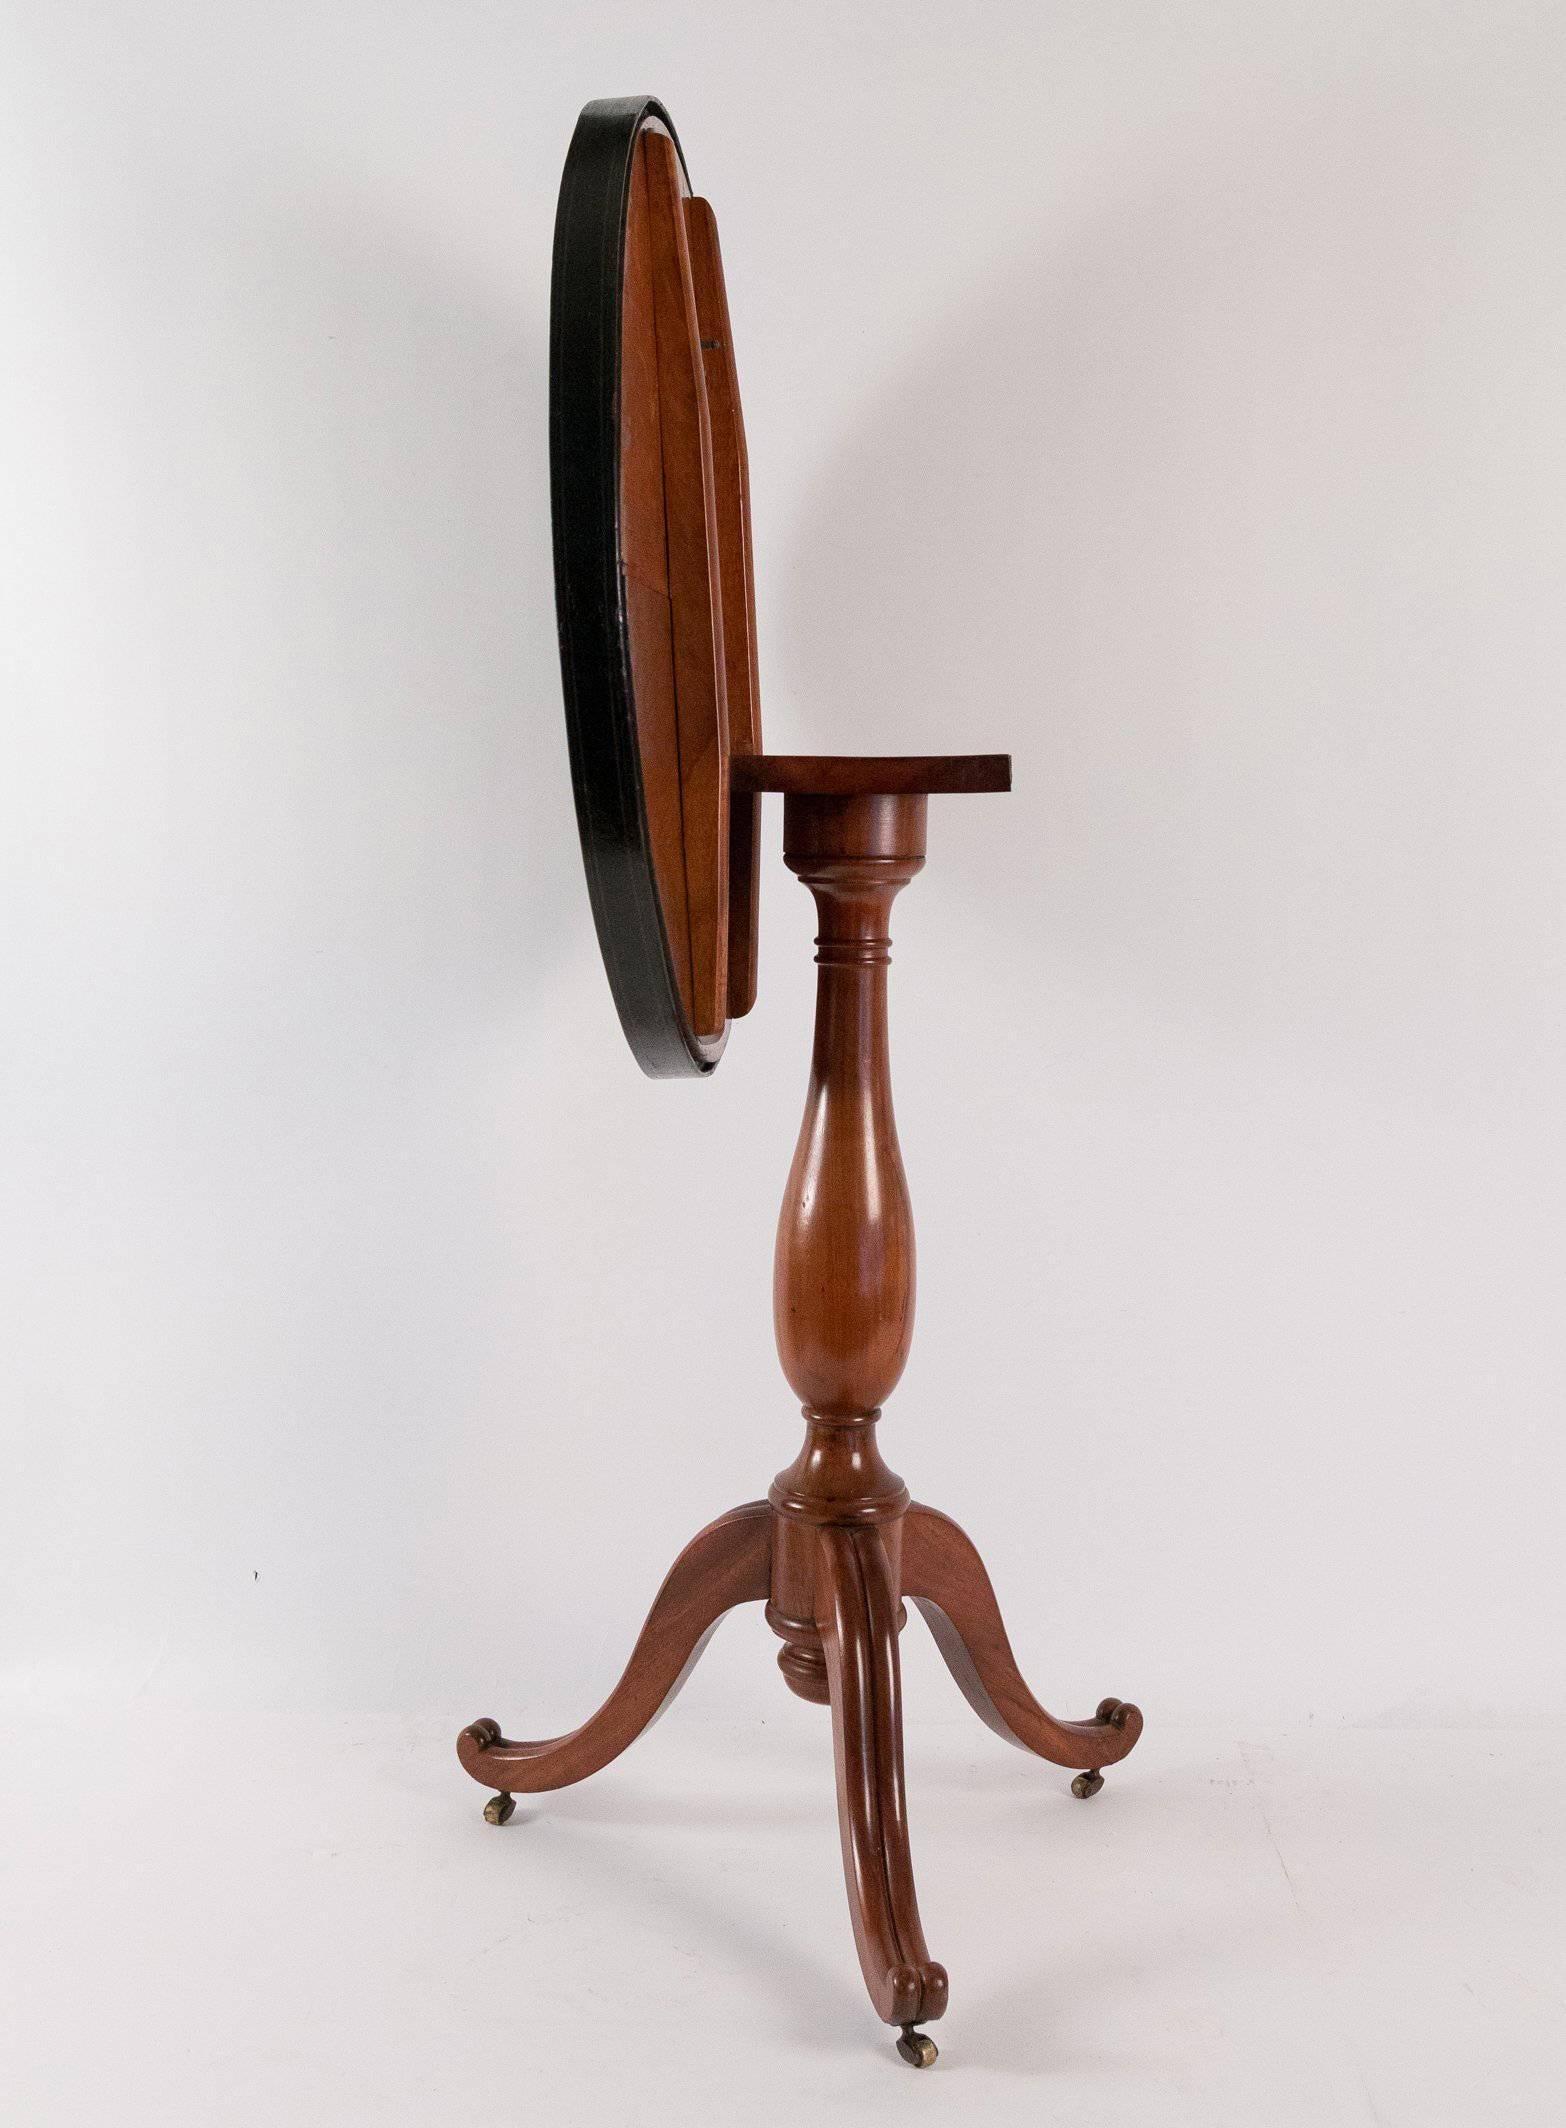 French Louis XVI Period Pedestal Table and Painted Iron Top Circa 1775-1785 For Sale 2